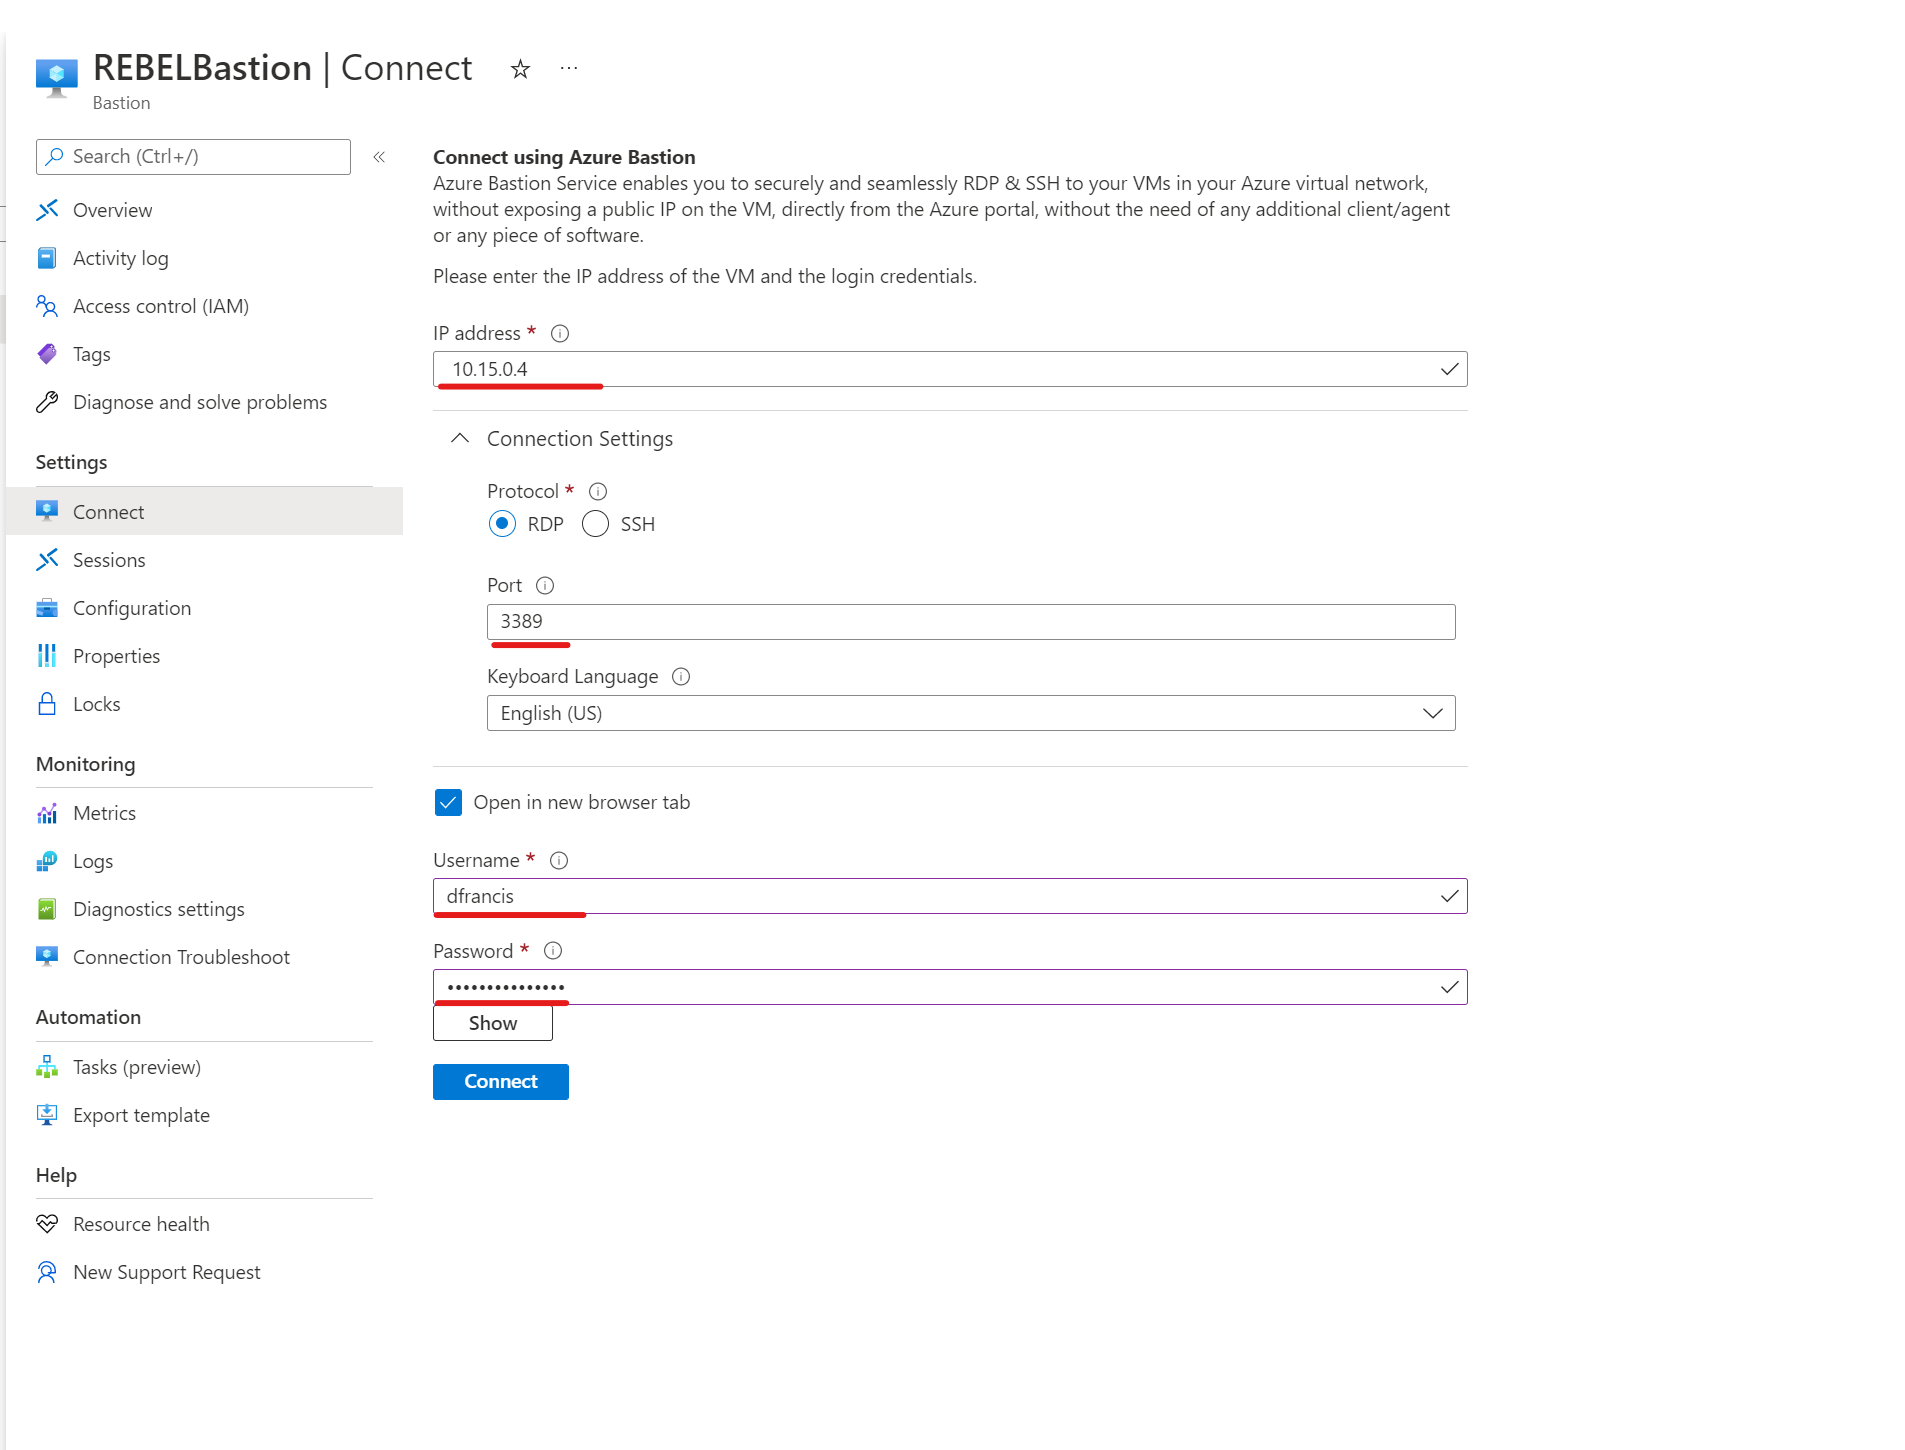 Step-by-Step guide to Azure Bastion IP-Based Connection